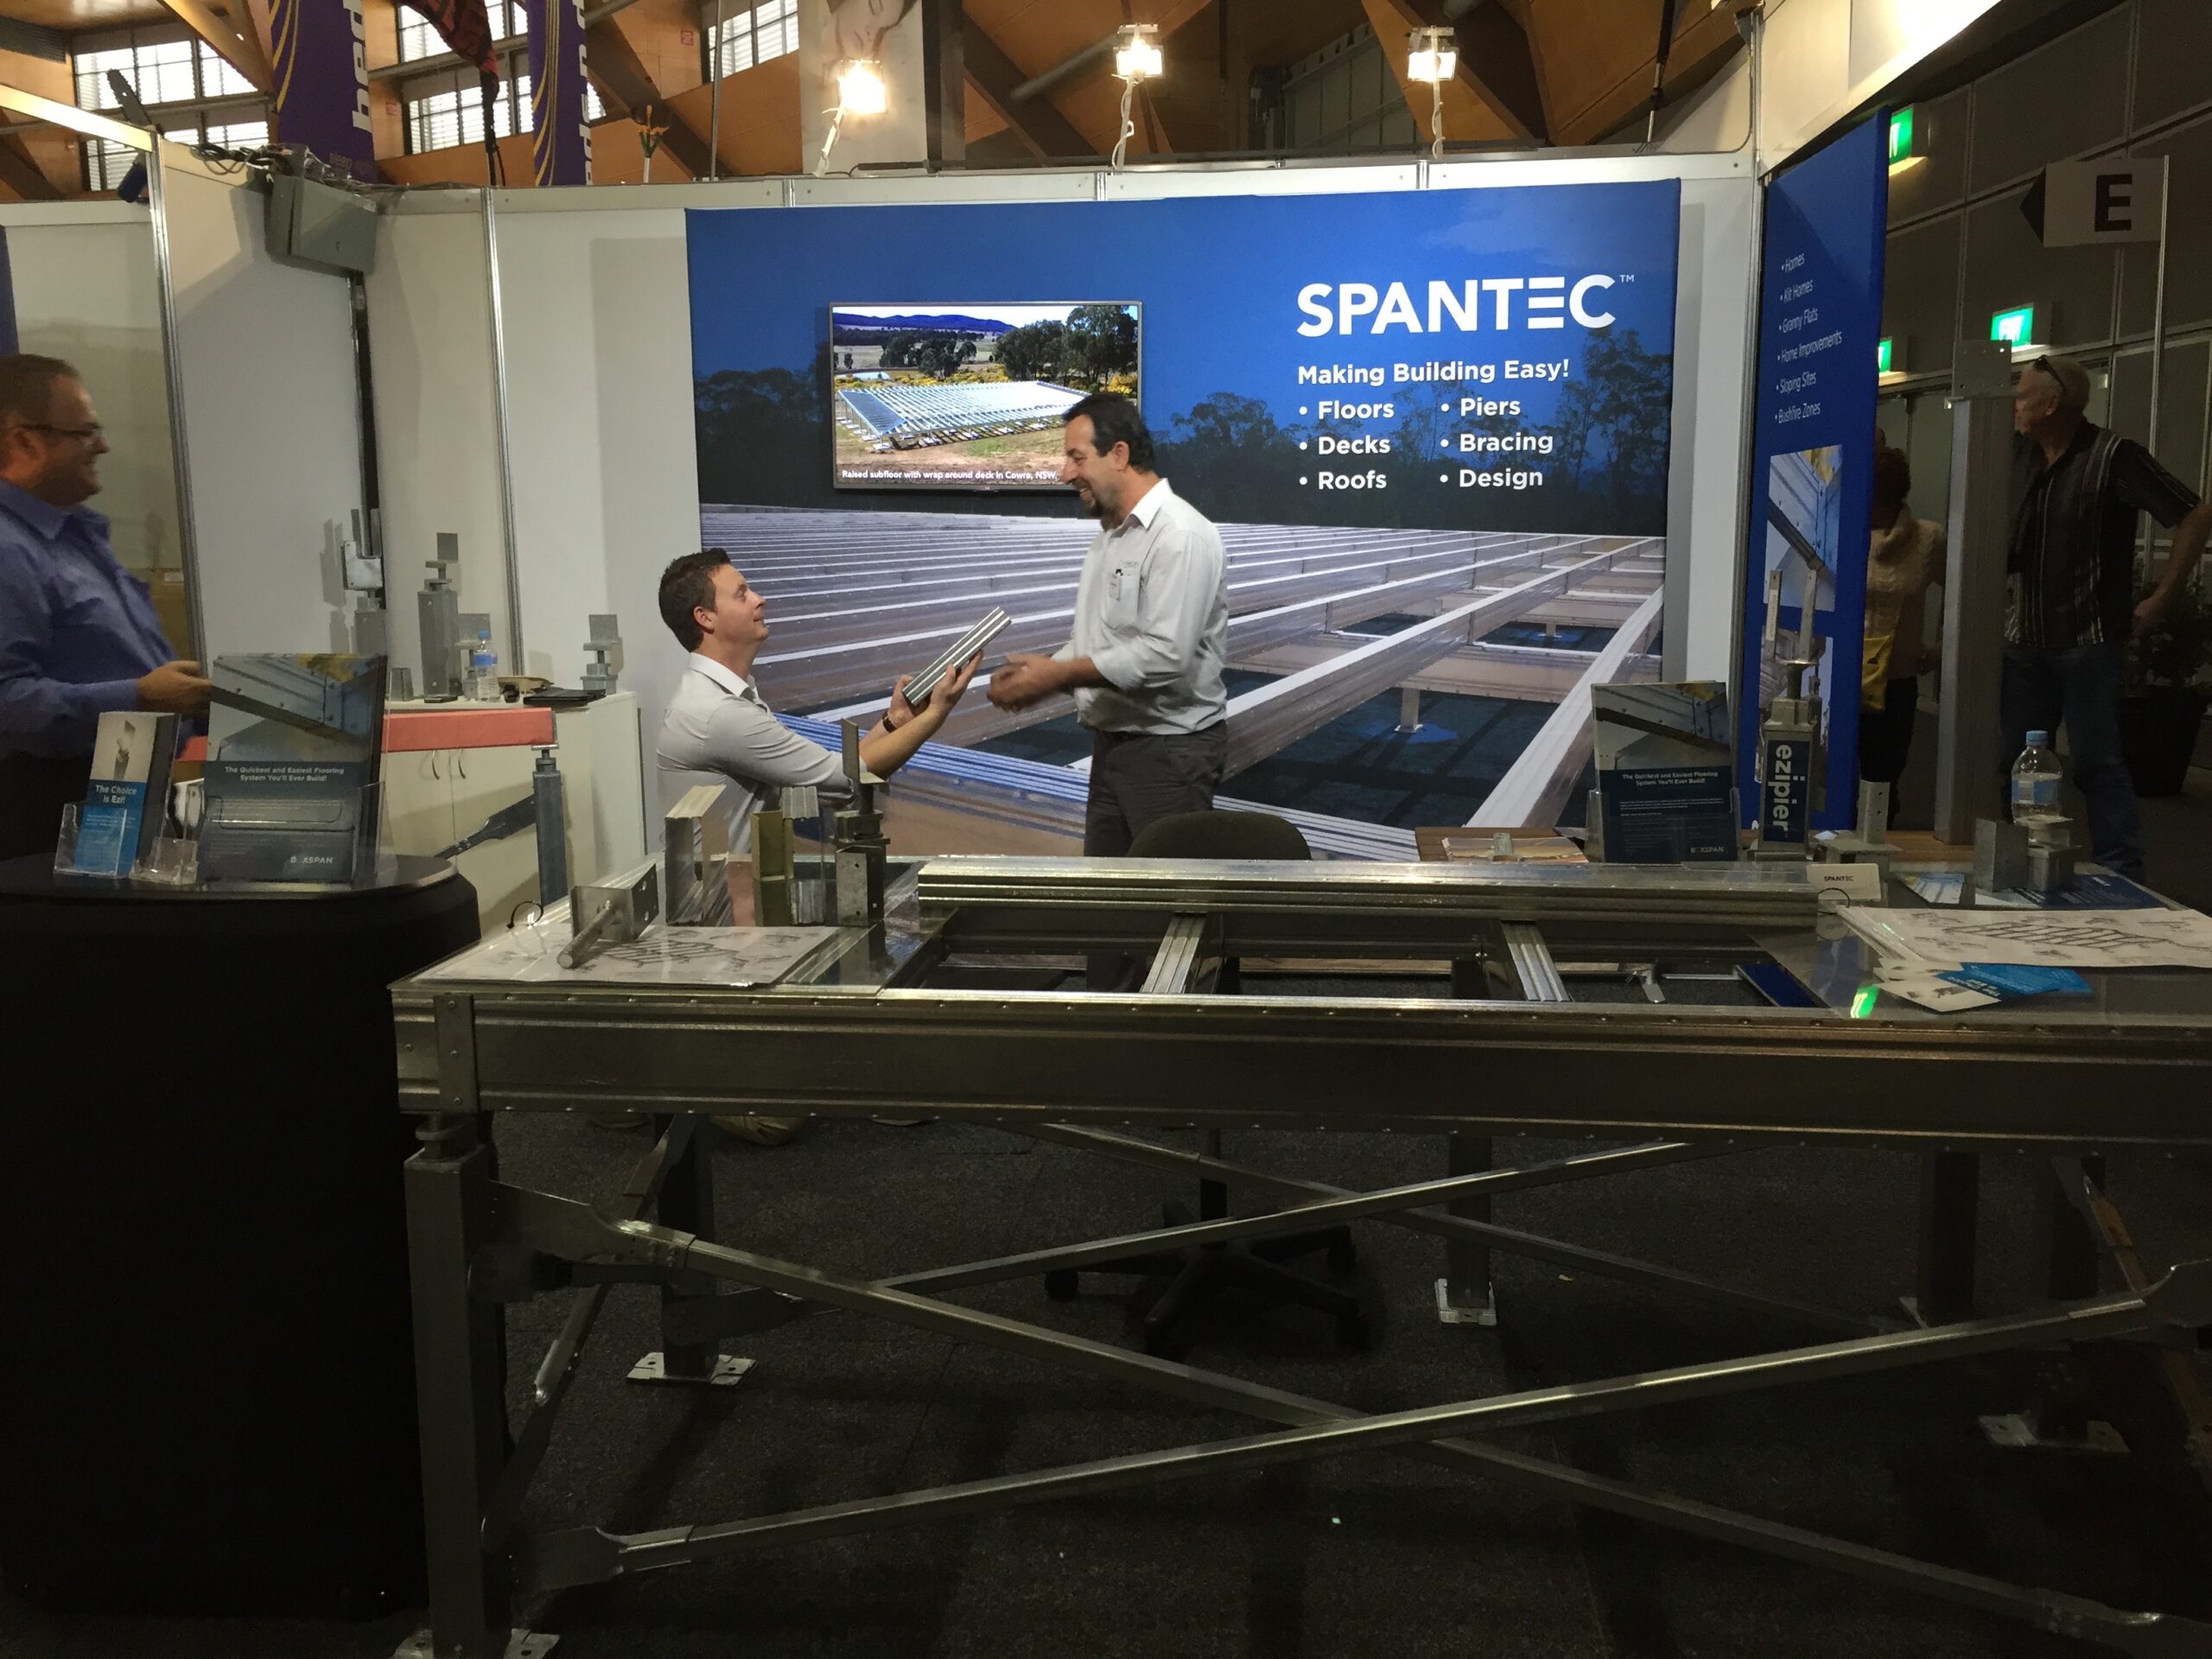 Salespeople Steve Targonski and Frank Paolucci at the Spantec stand which is a at trade shows across Australia total tool